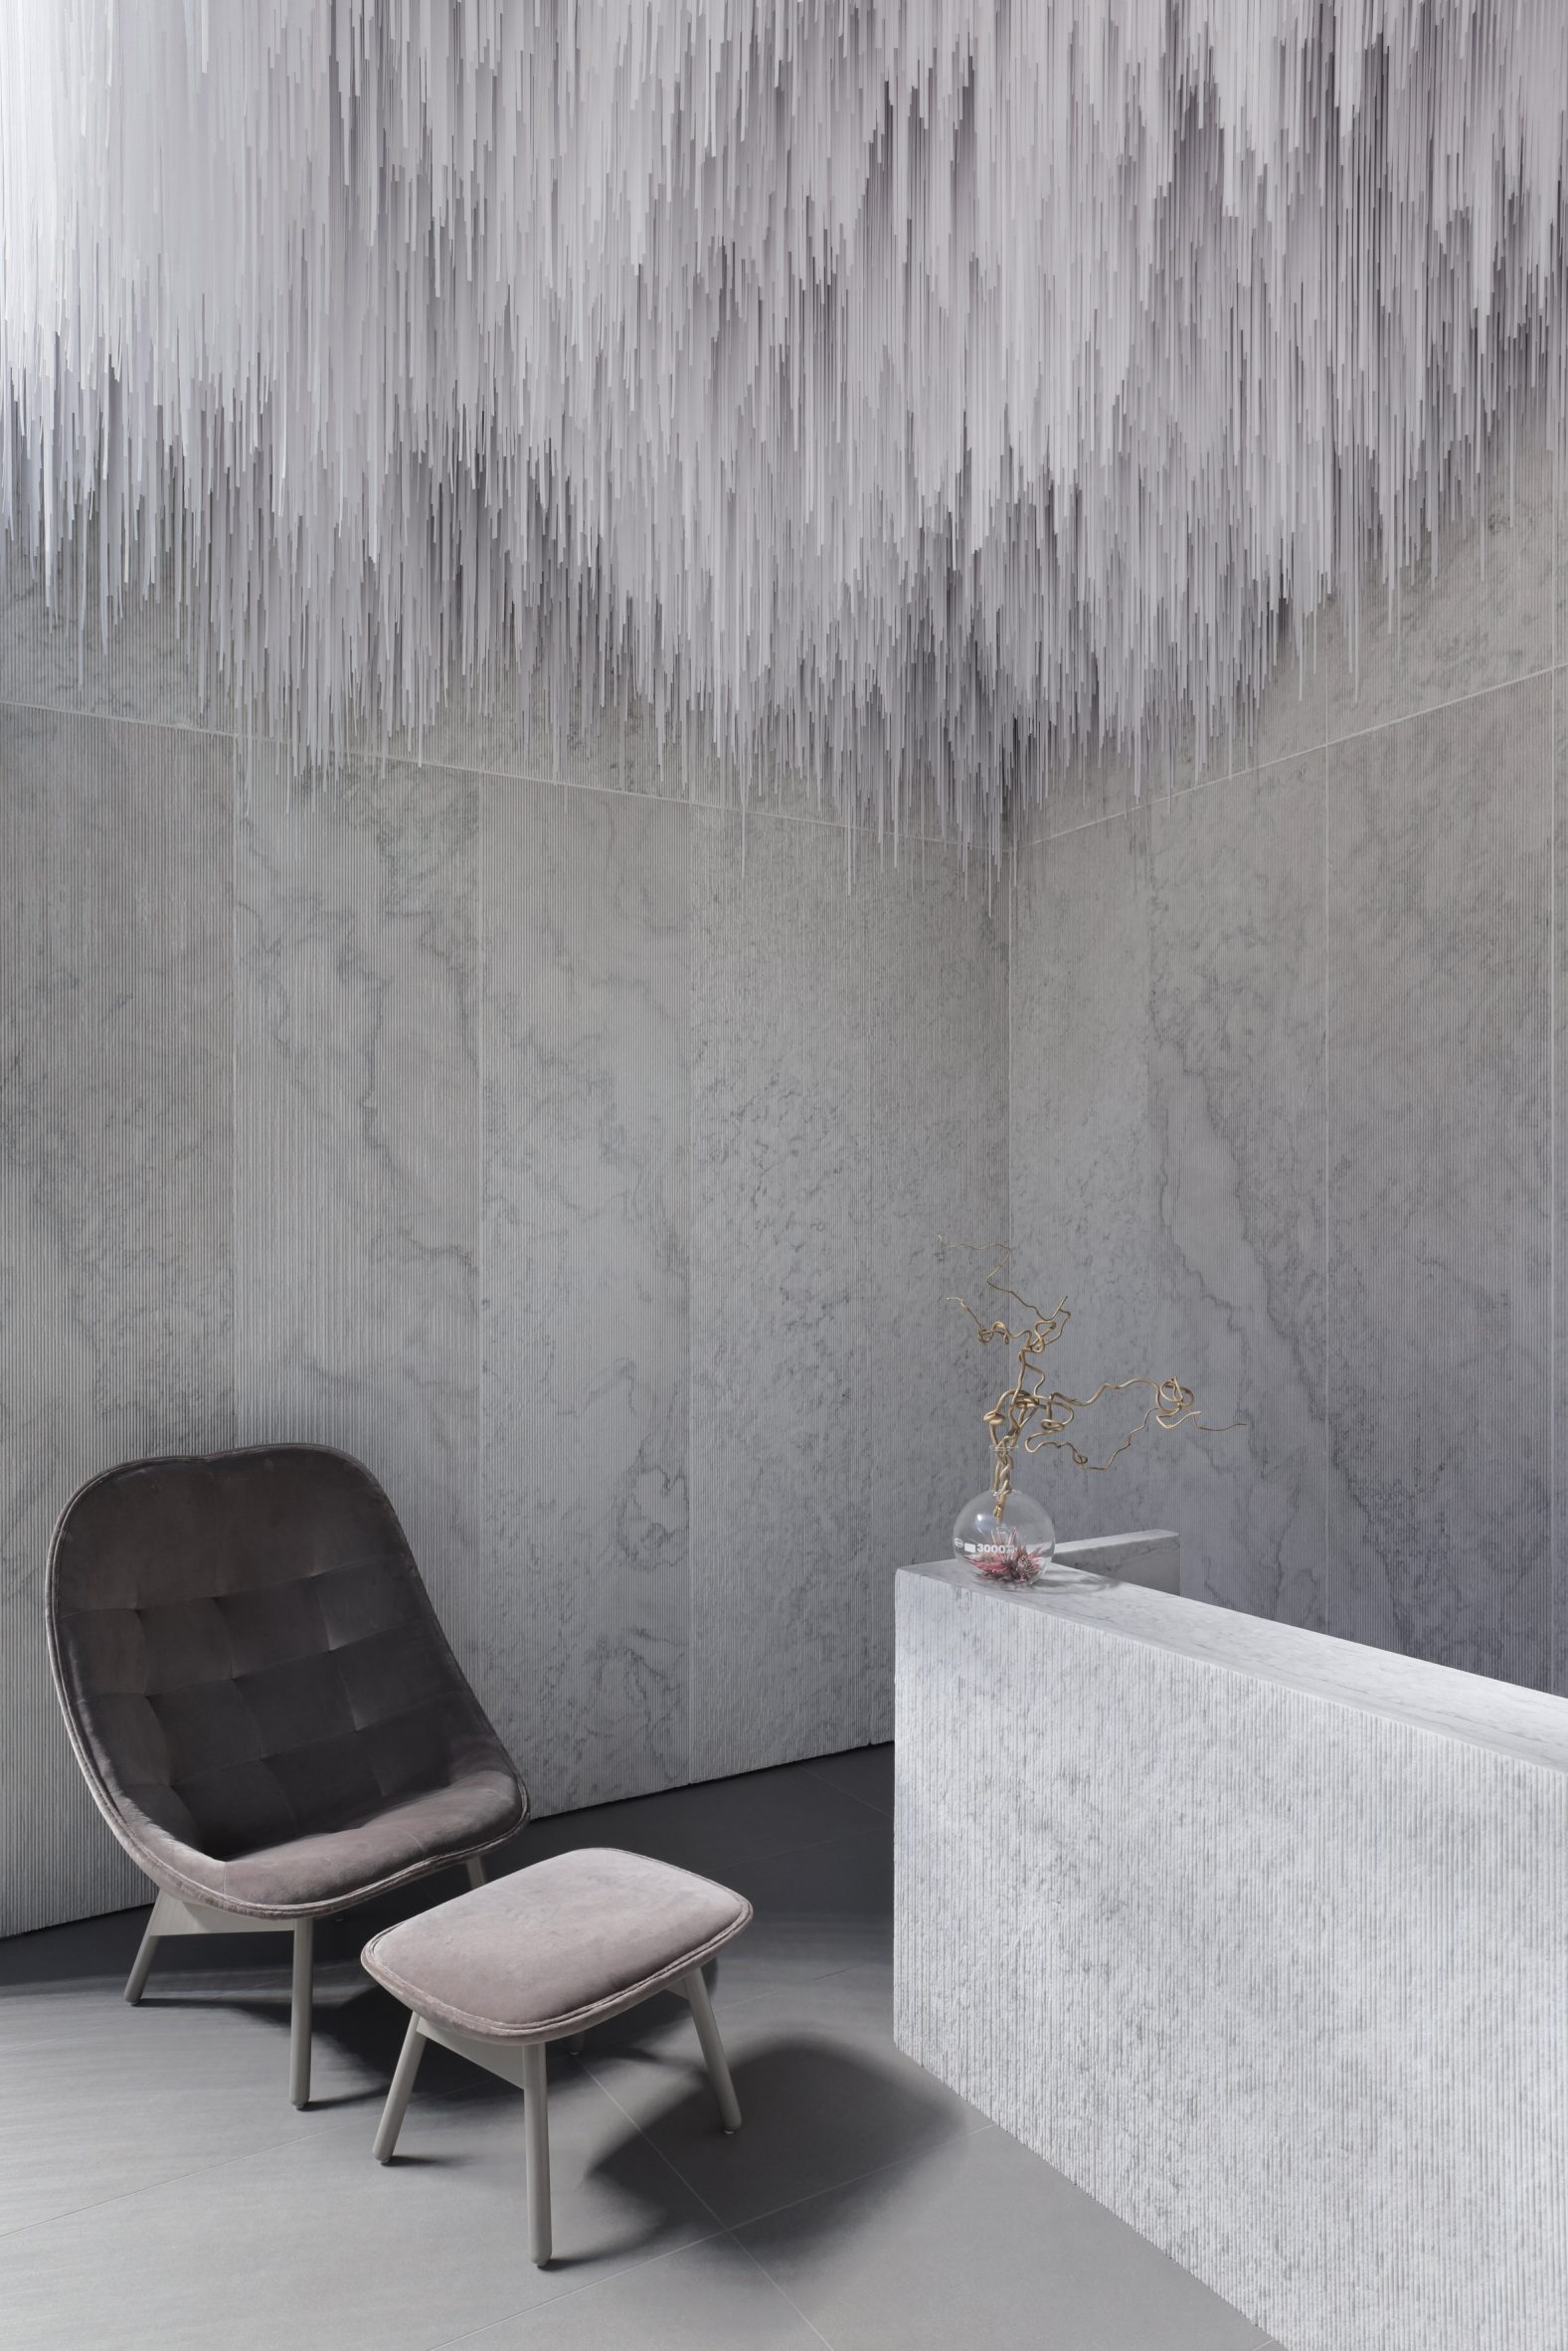 AER Skinlab in Vancour features stalactite-like ceiling installation